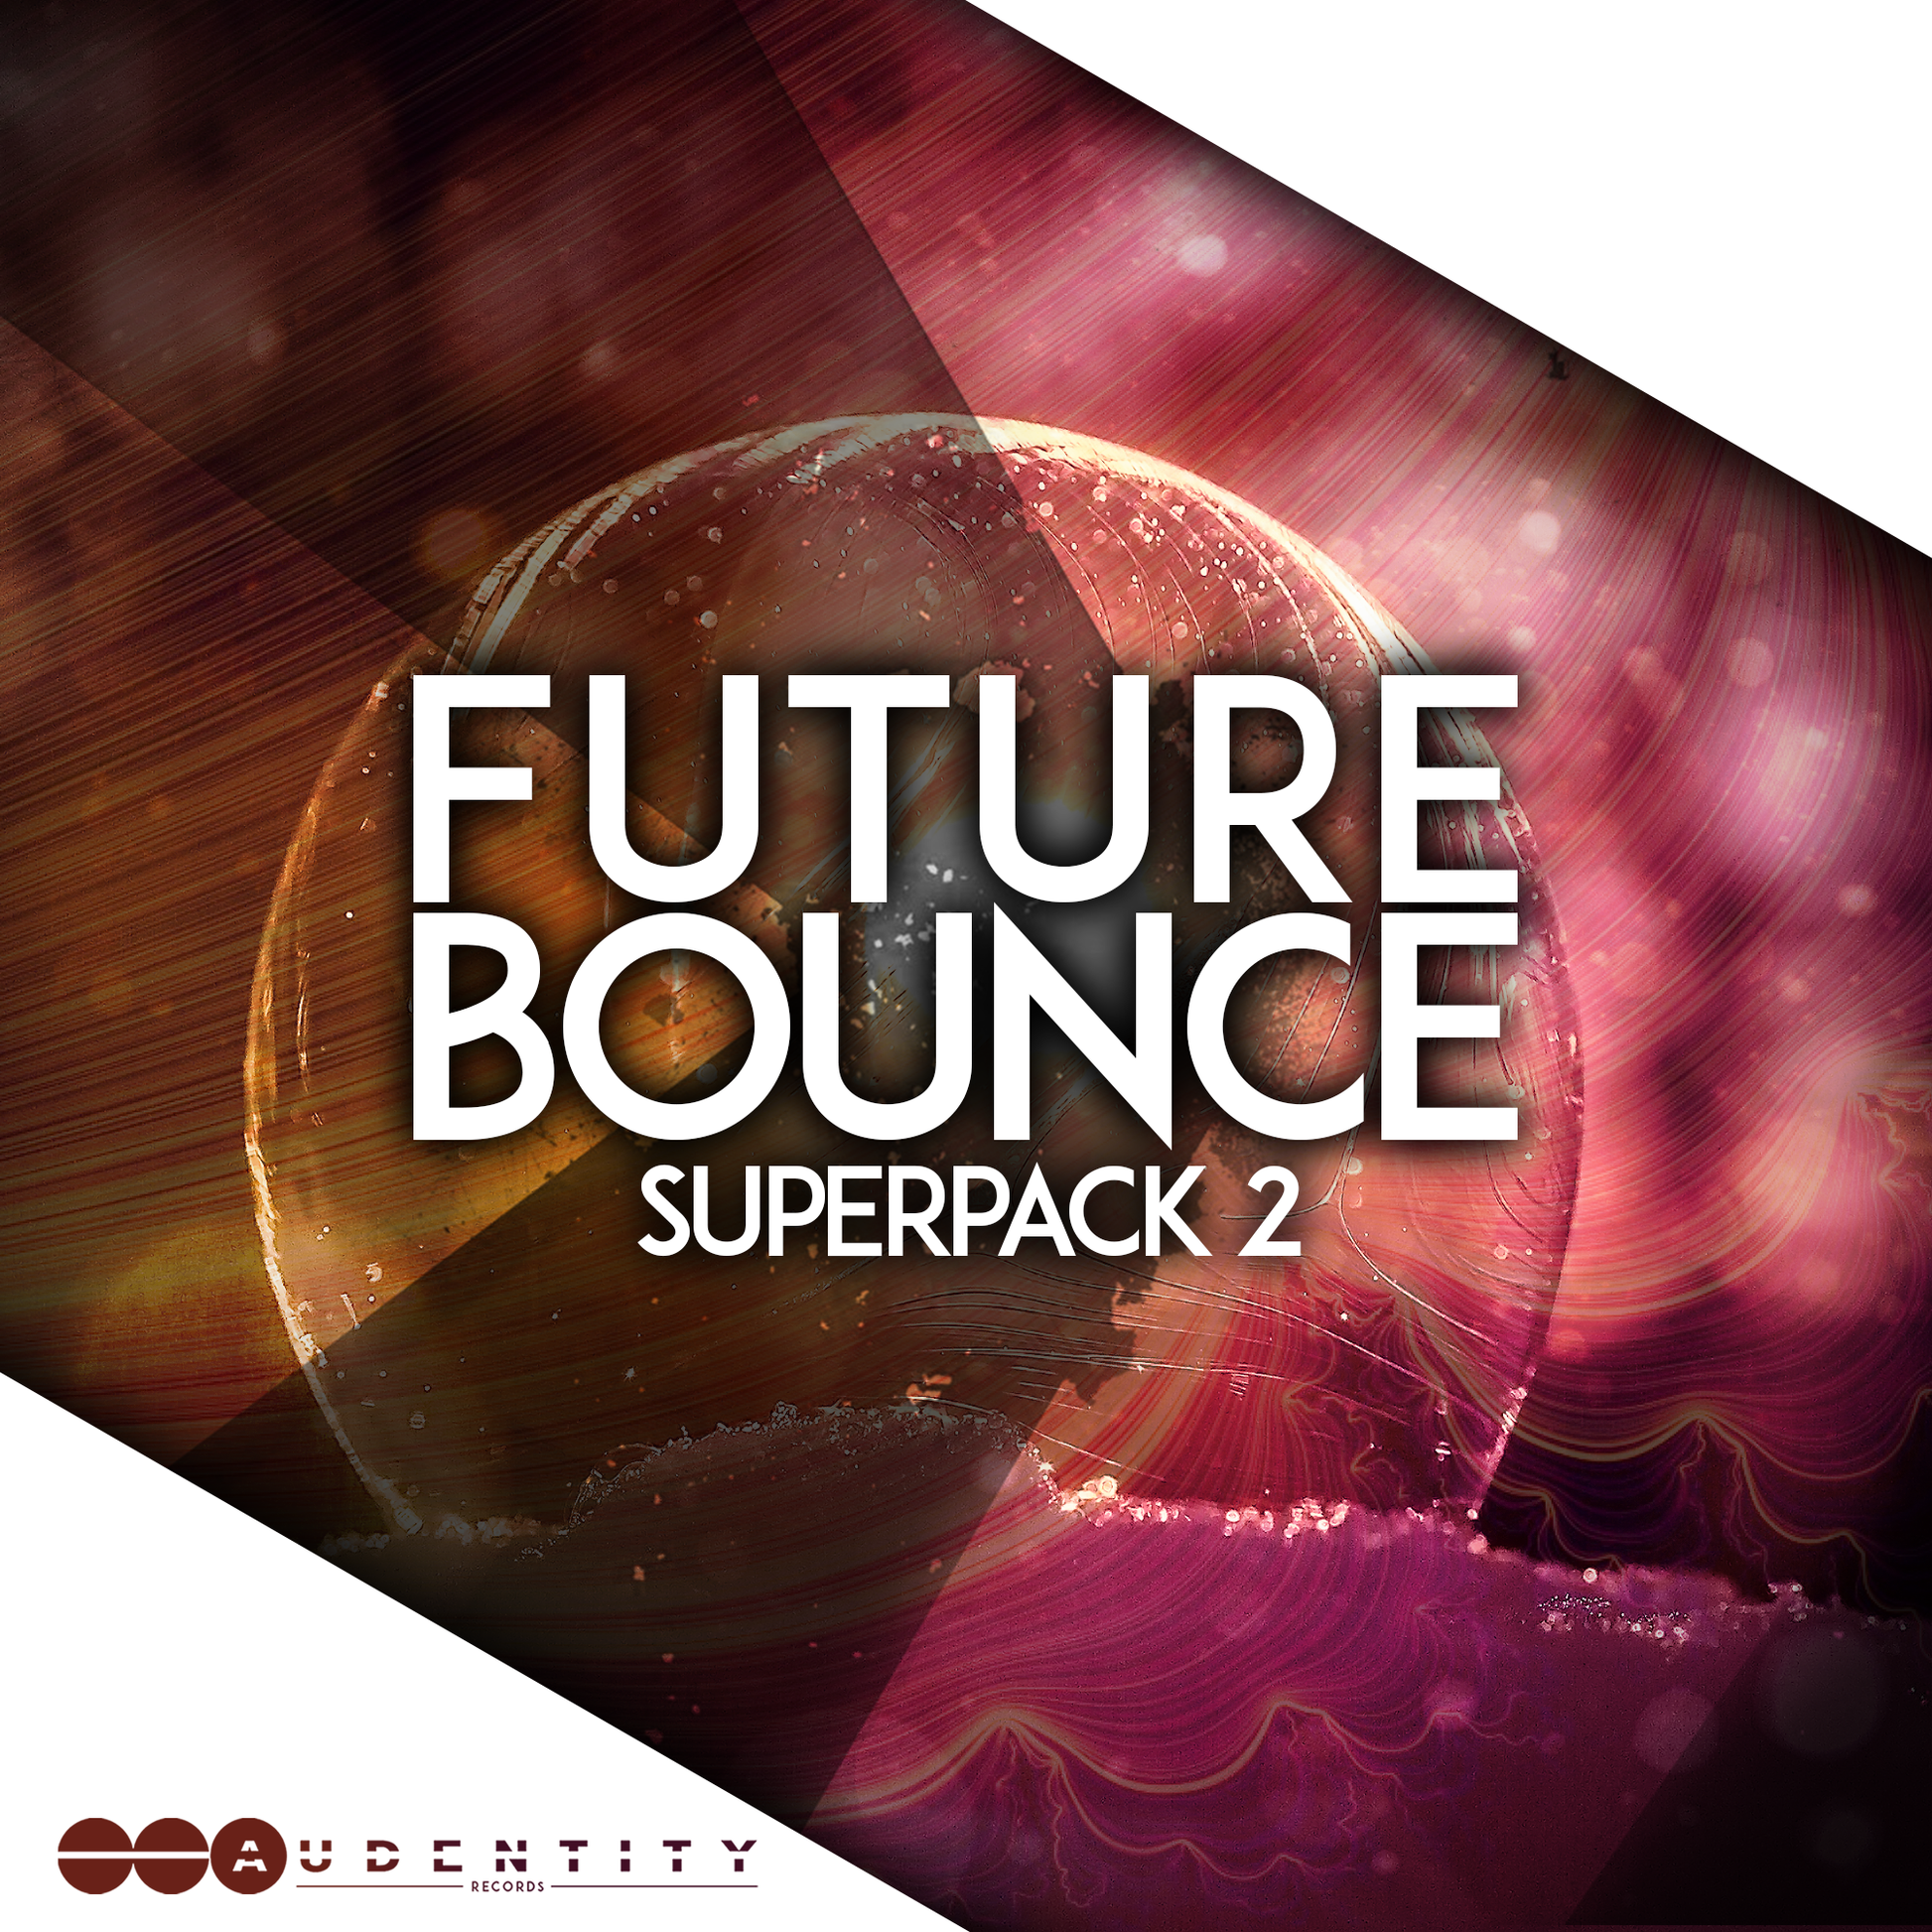 Future Bounce Superpack 2 - Audentity Records | Samplestore